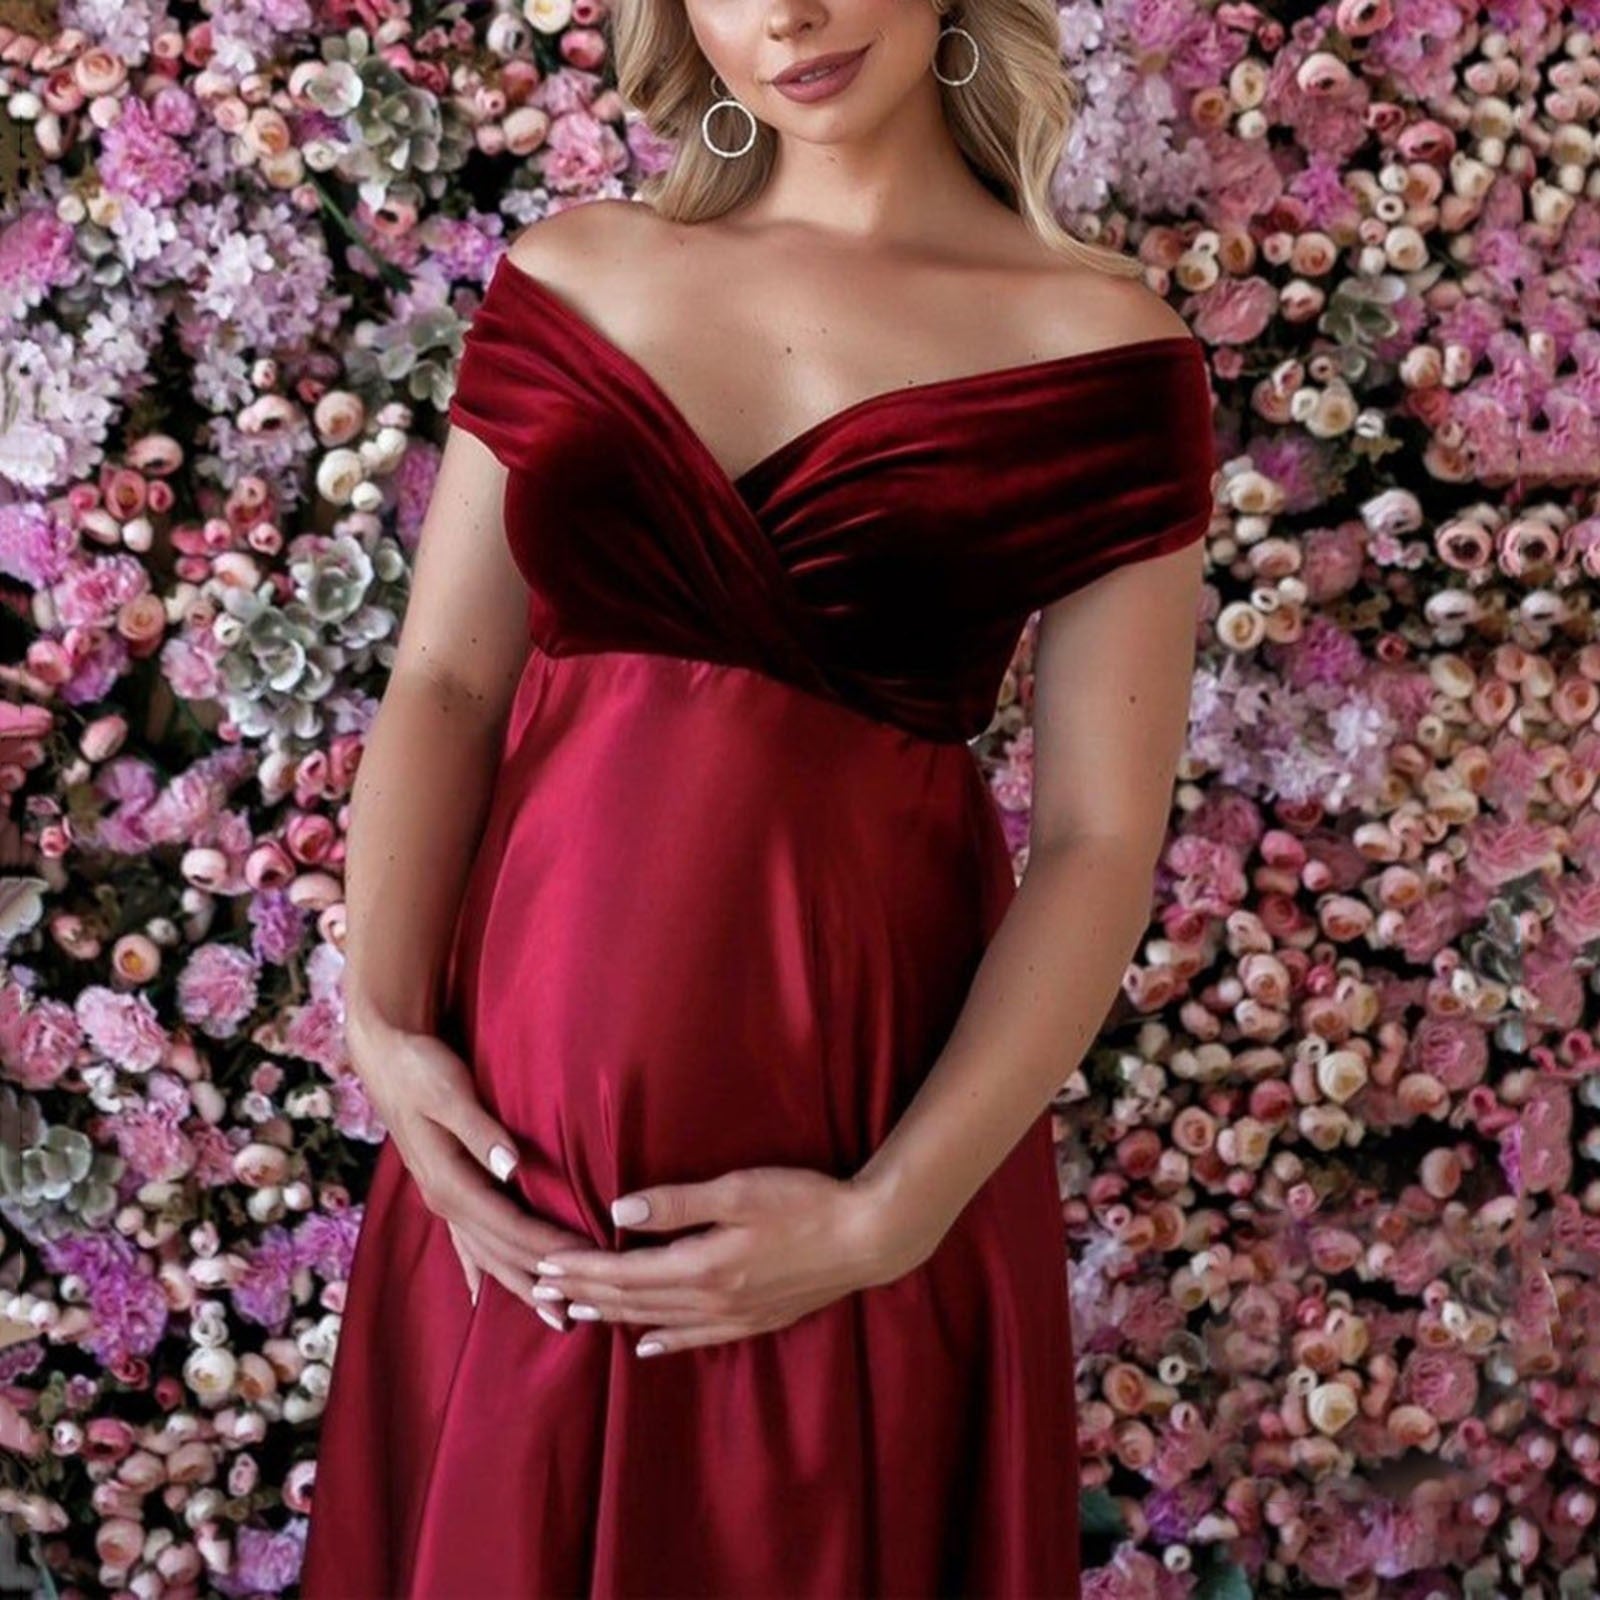 Sexy Off Shoulder Maternity Maxi Gowns Dress